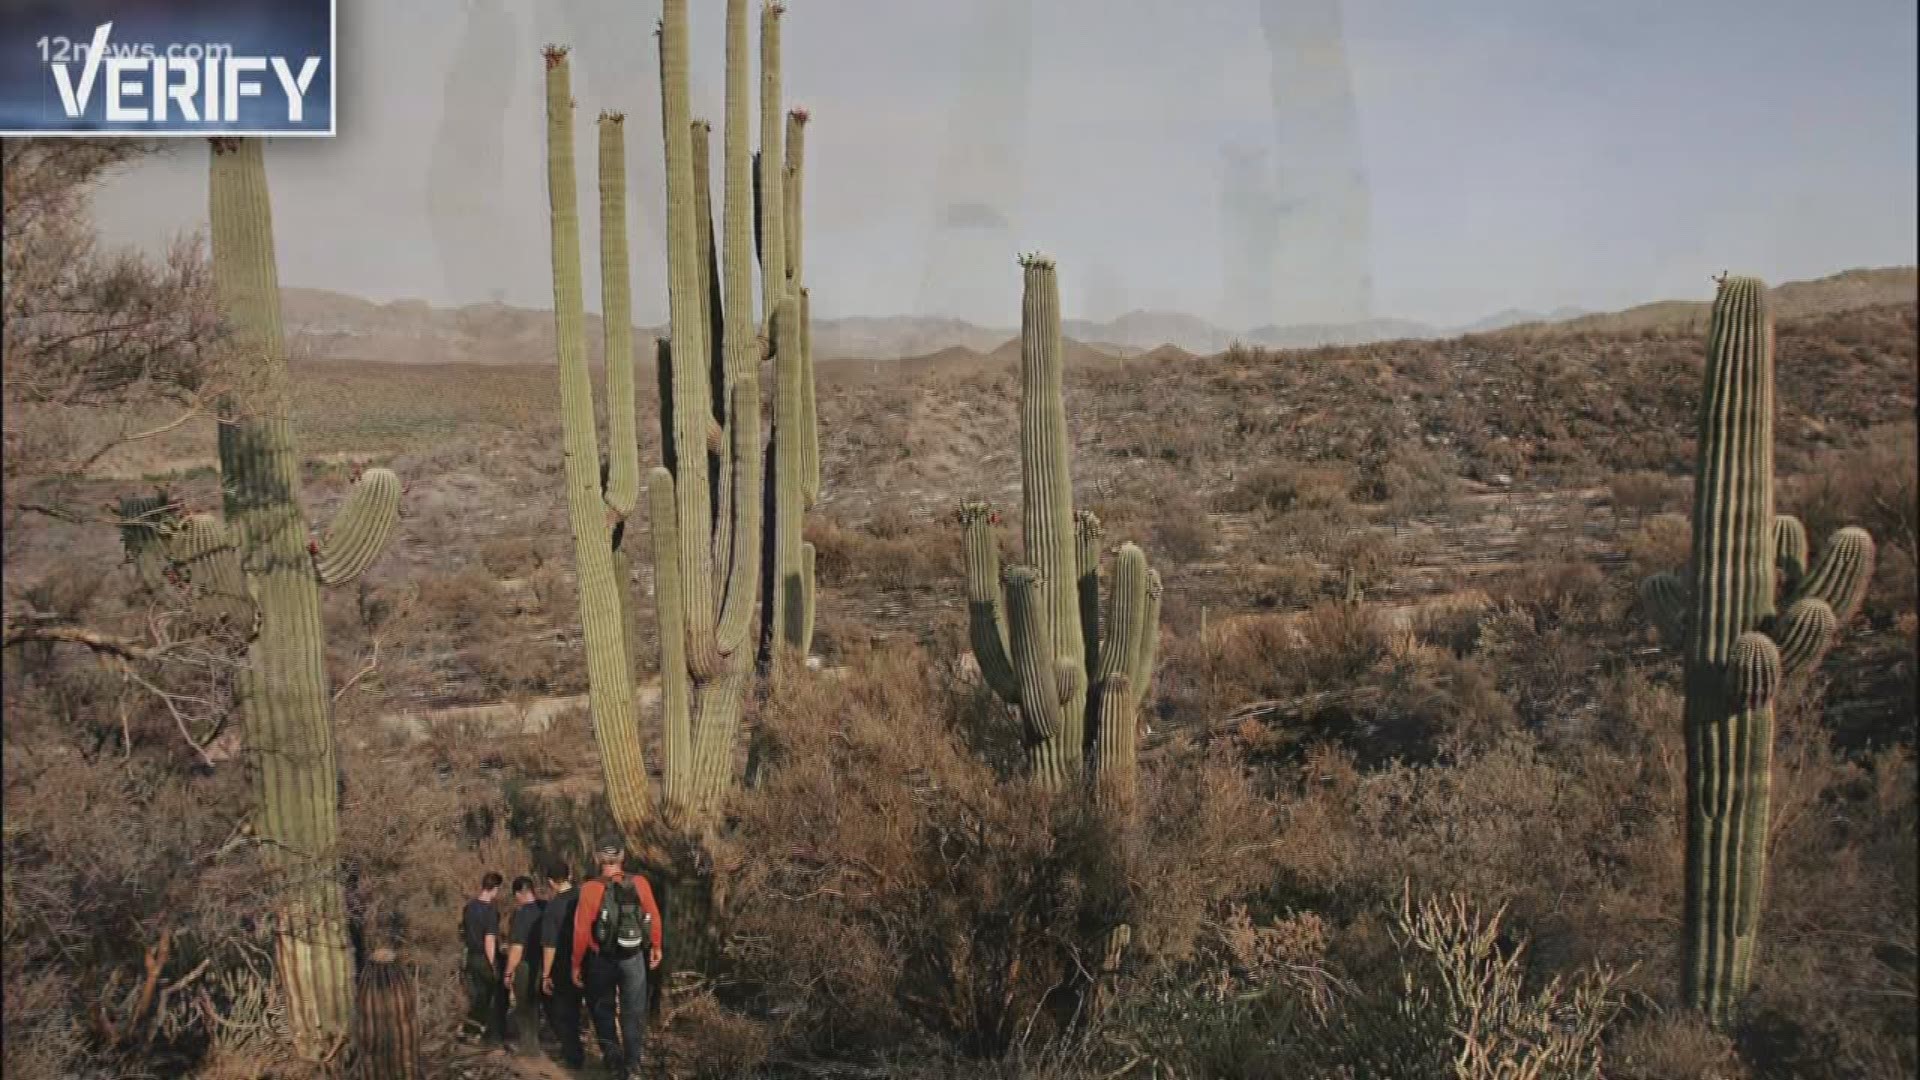 The saguaro is protected by state law, you can't even move one without permission from the Arizona Department of Agriculture. So, we verify if you're breaking the law by decorating one on your own property.